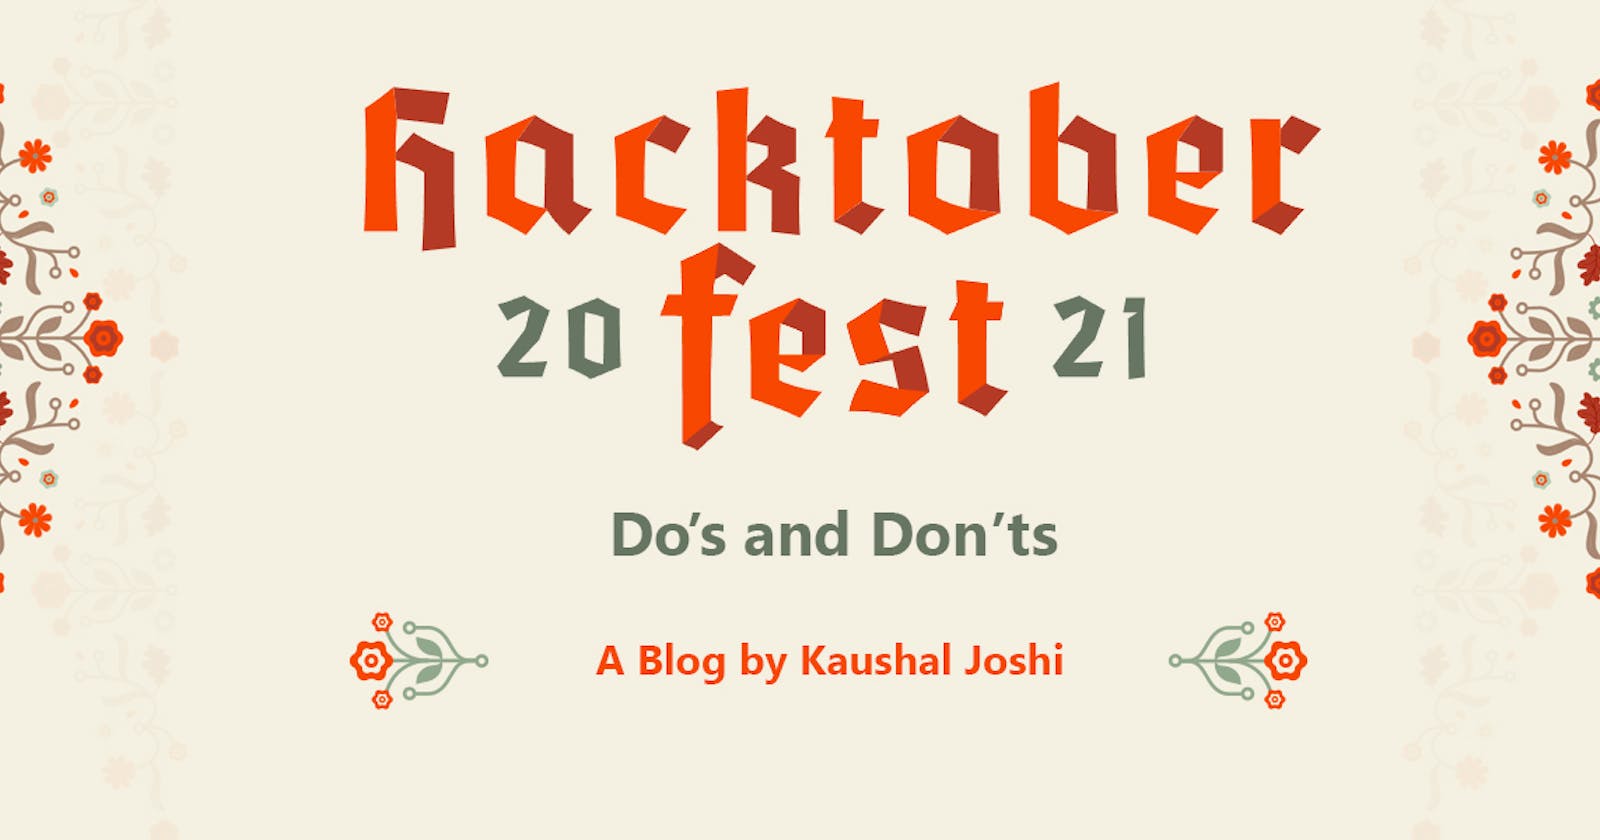 Hacktoberfest: Do's and Dont's